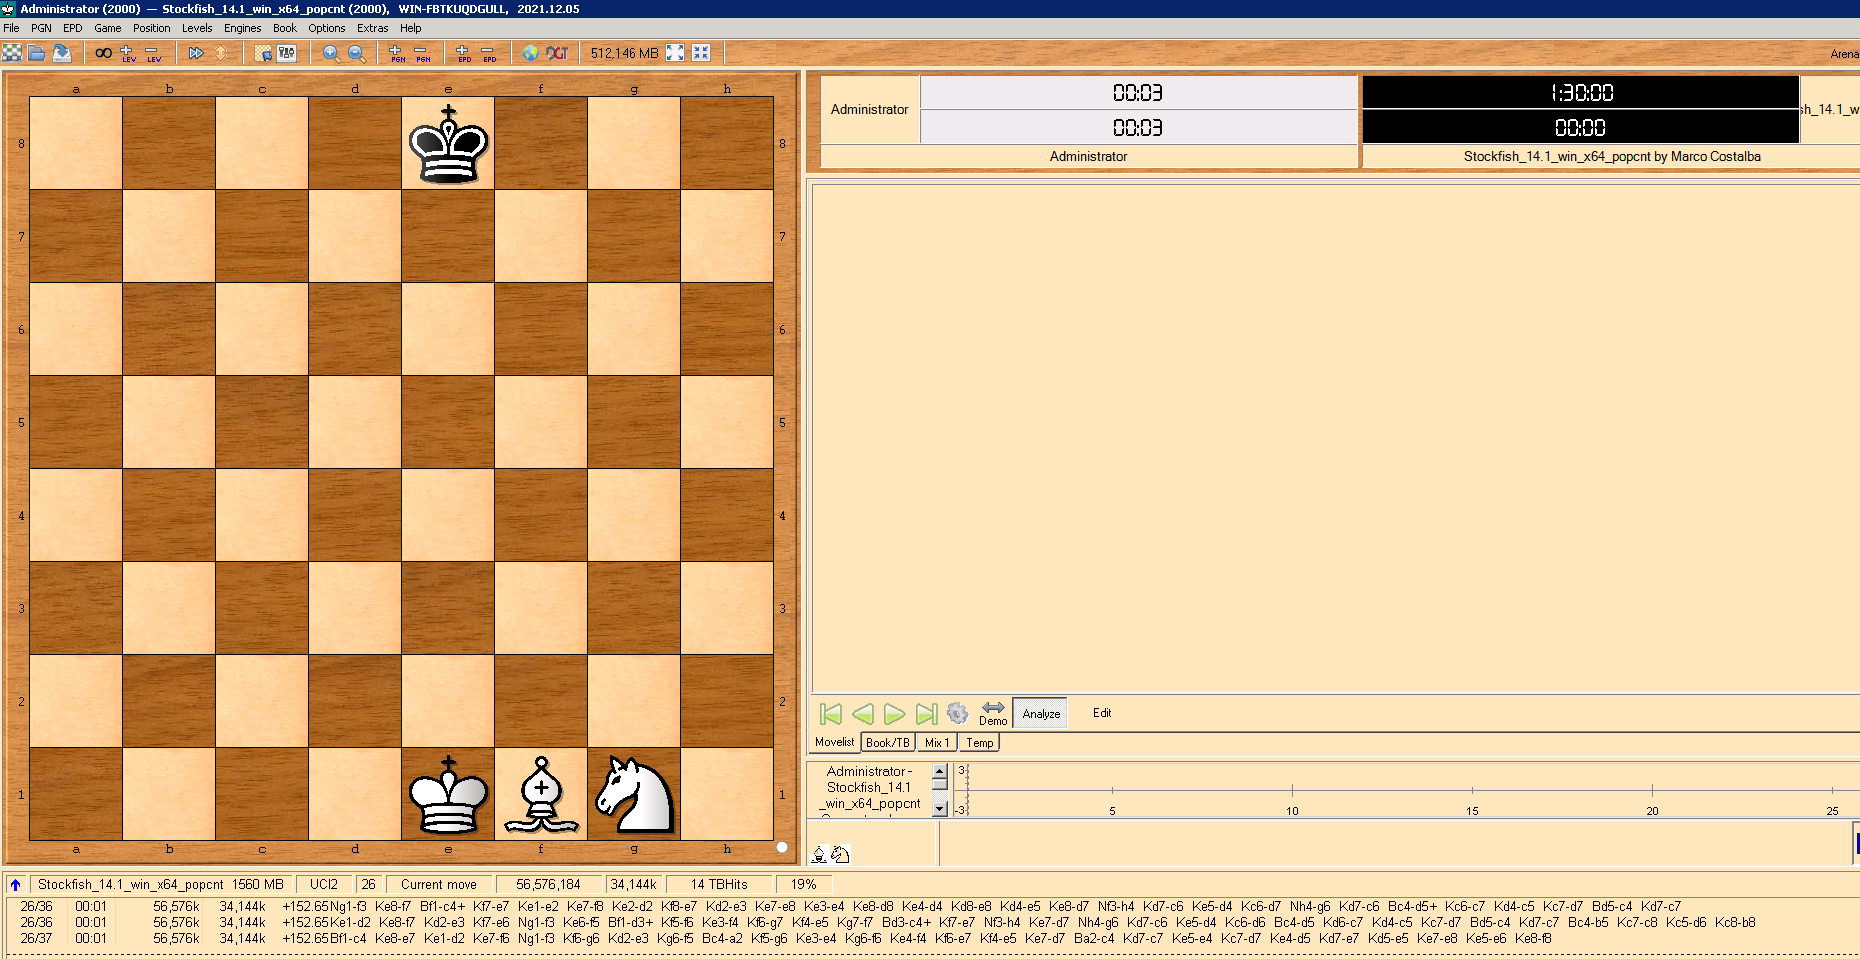 Chess FIDE Online arena software is not working - Chess Forums 